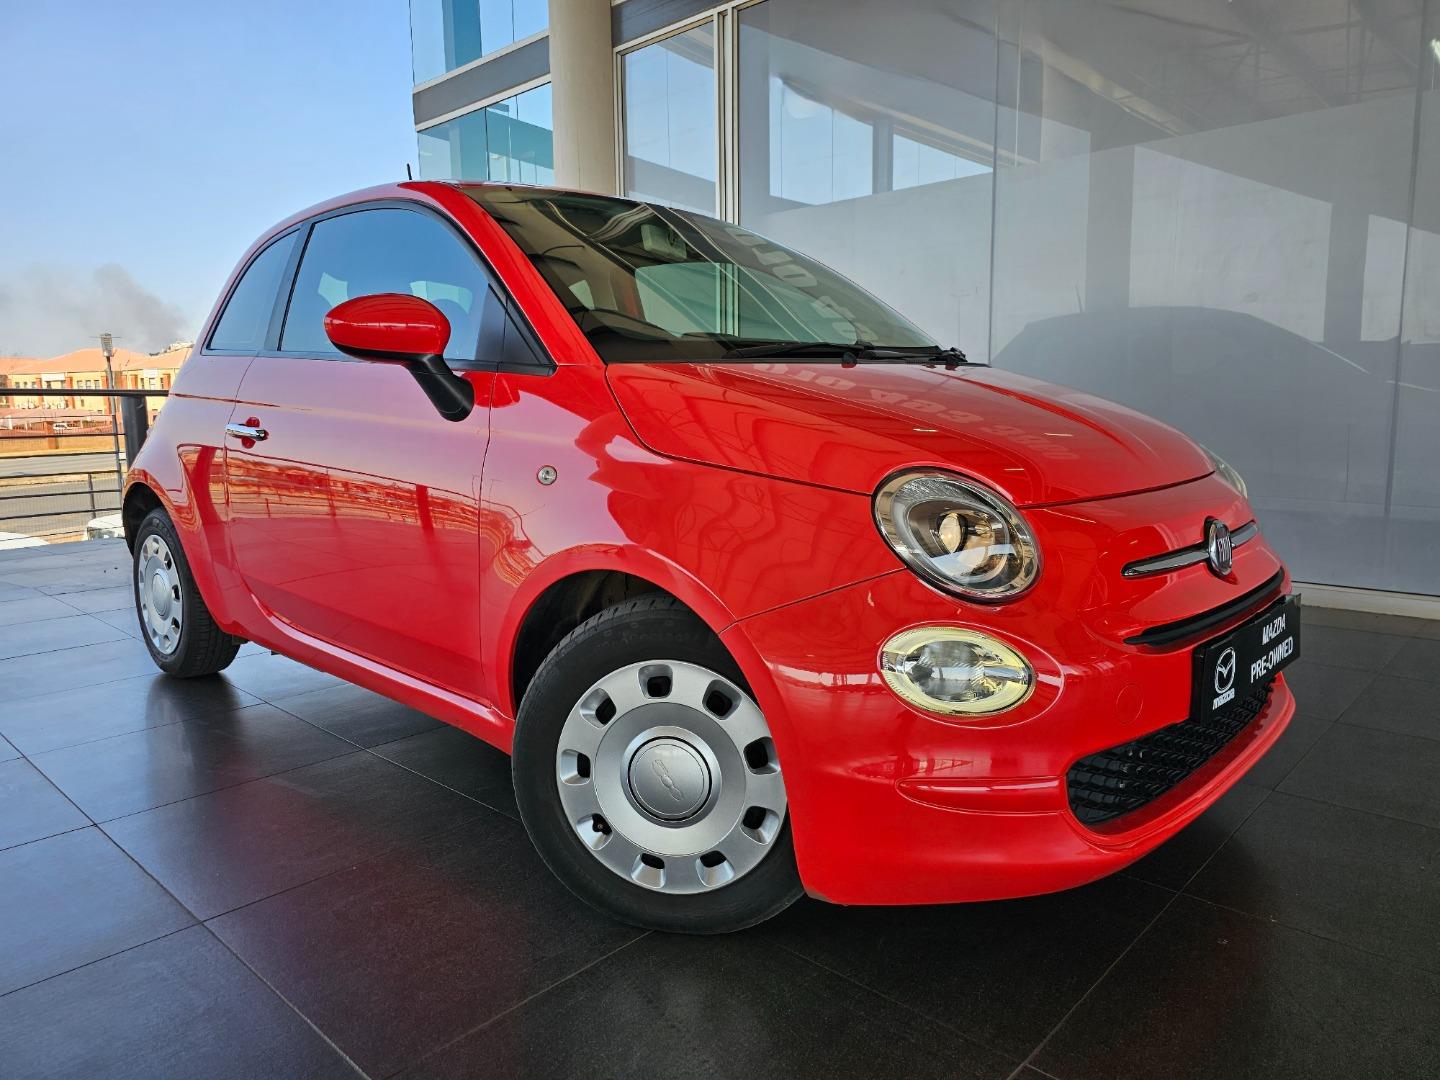 2018 Fiat 500  for sale - UC4249